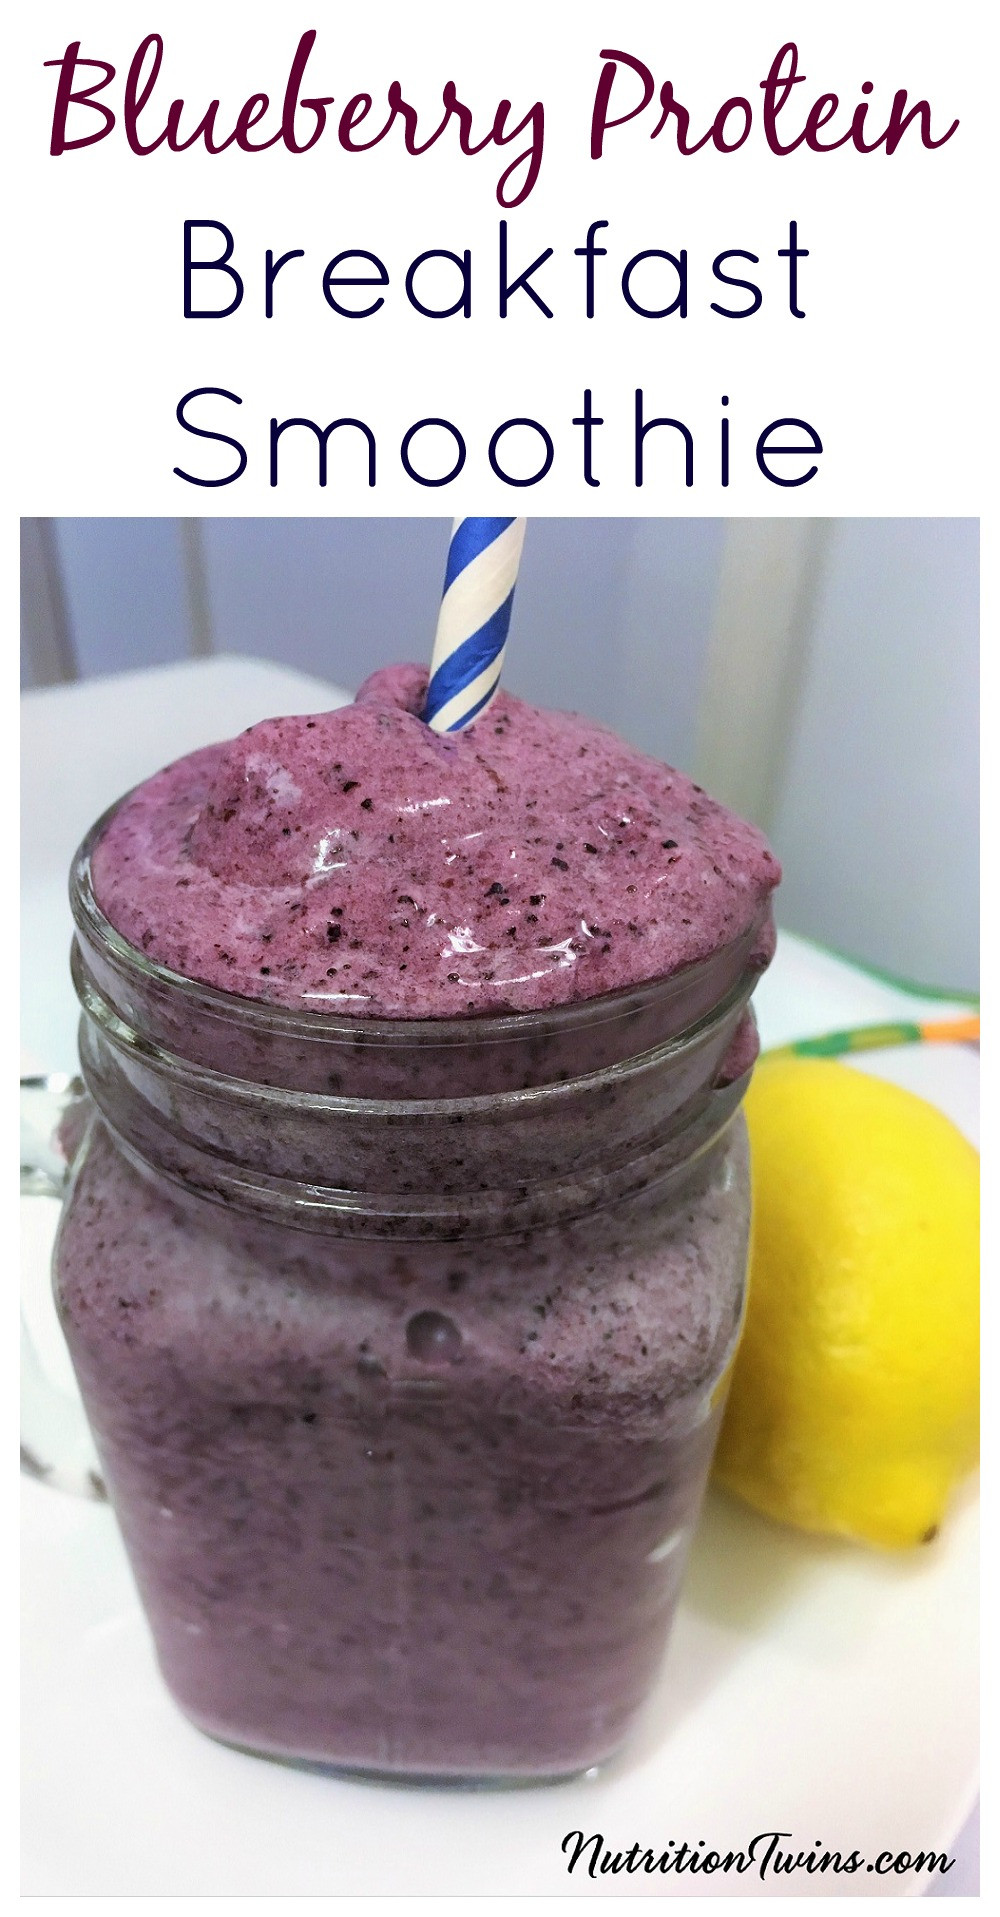 Protein Smoothie Recipes Weight Loss
 Blueberry Protein Weight Loss Breakfast Smoothie